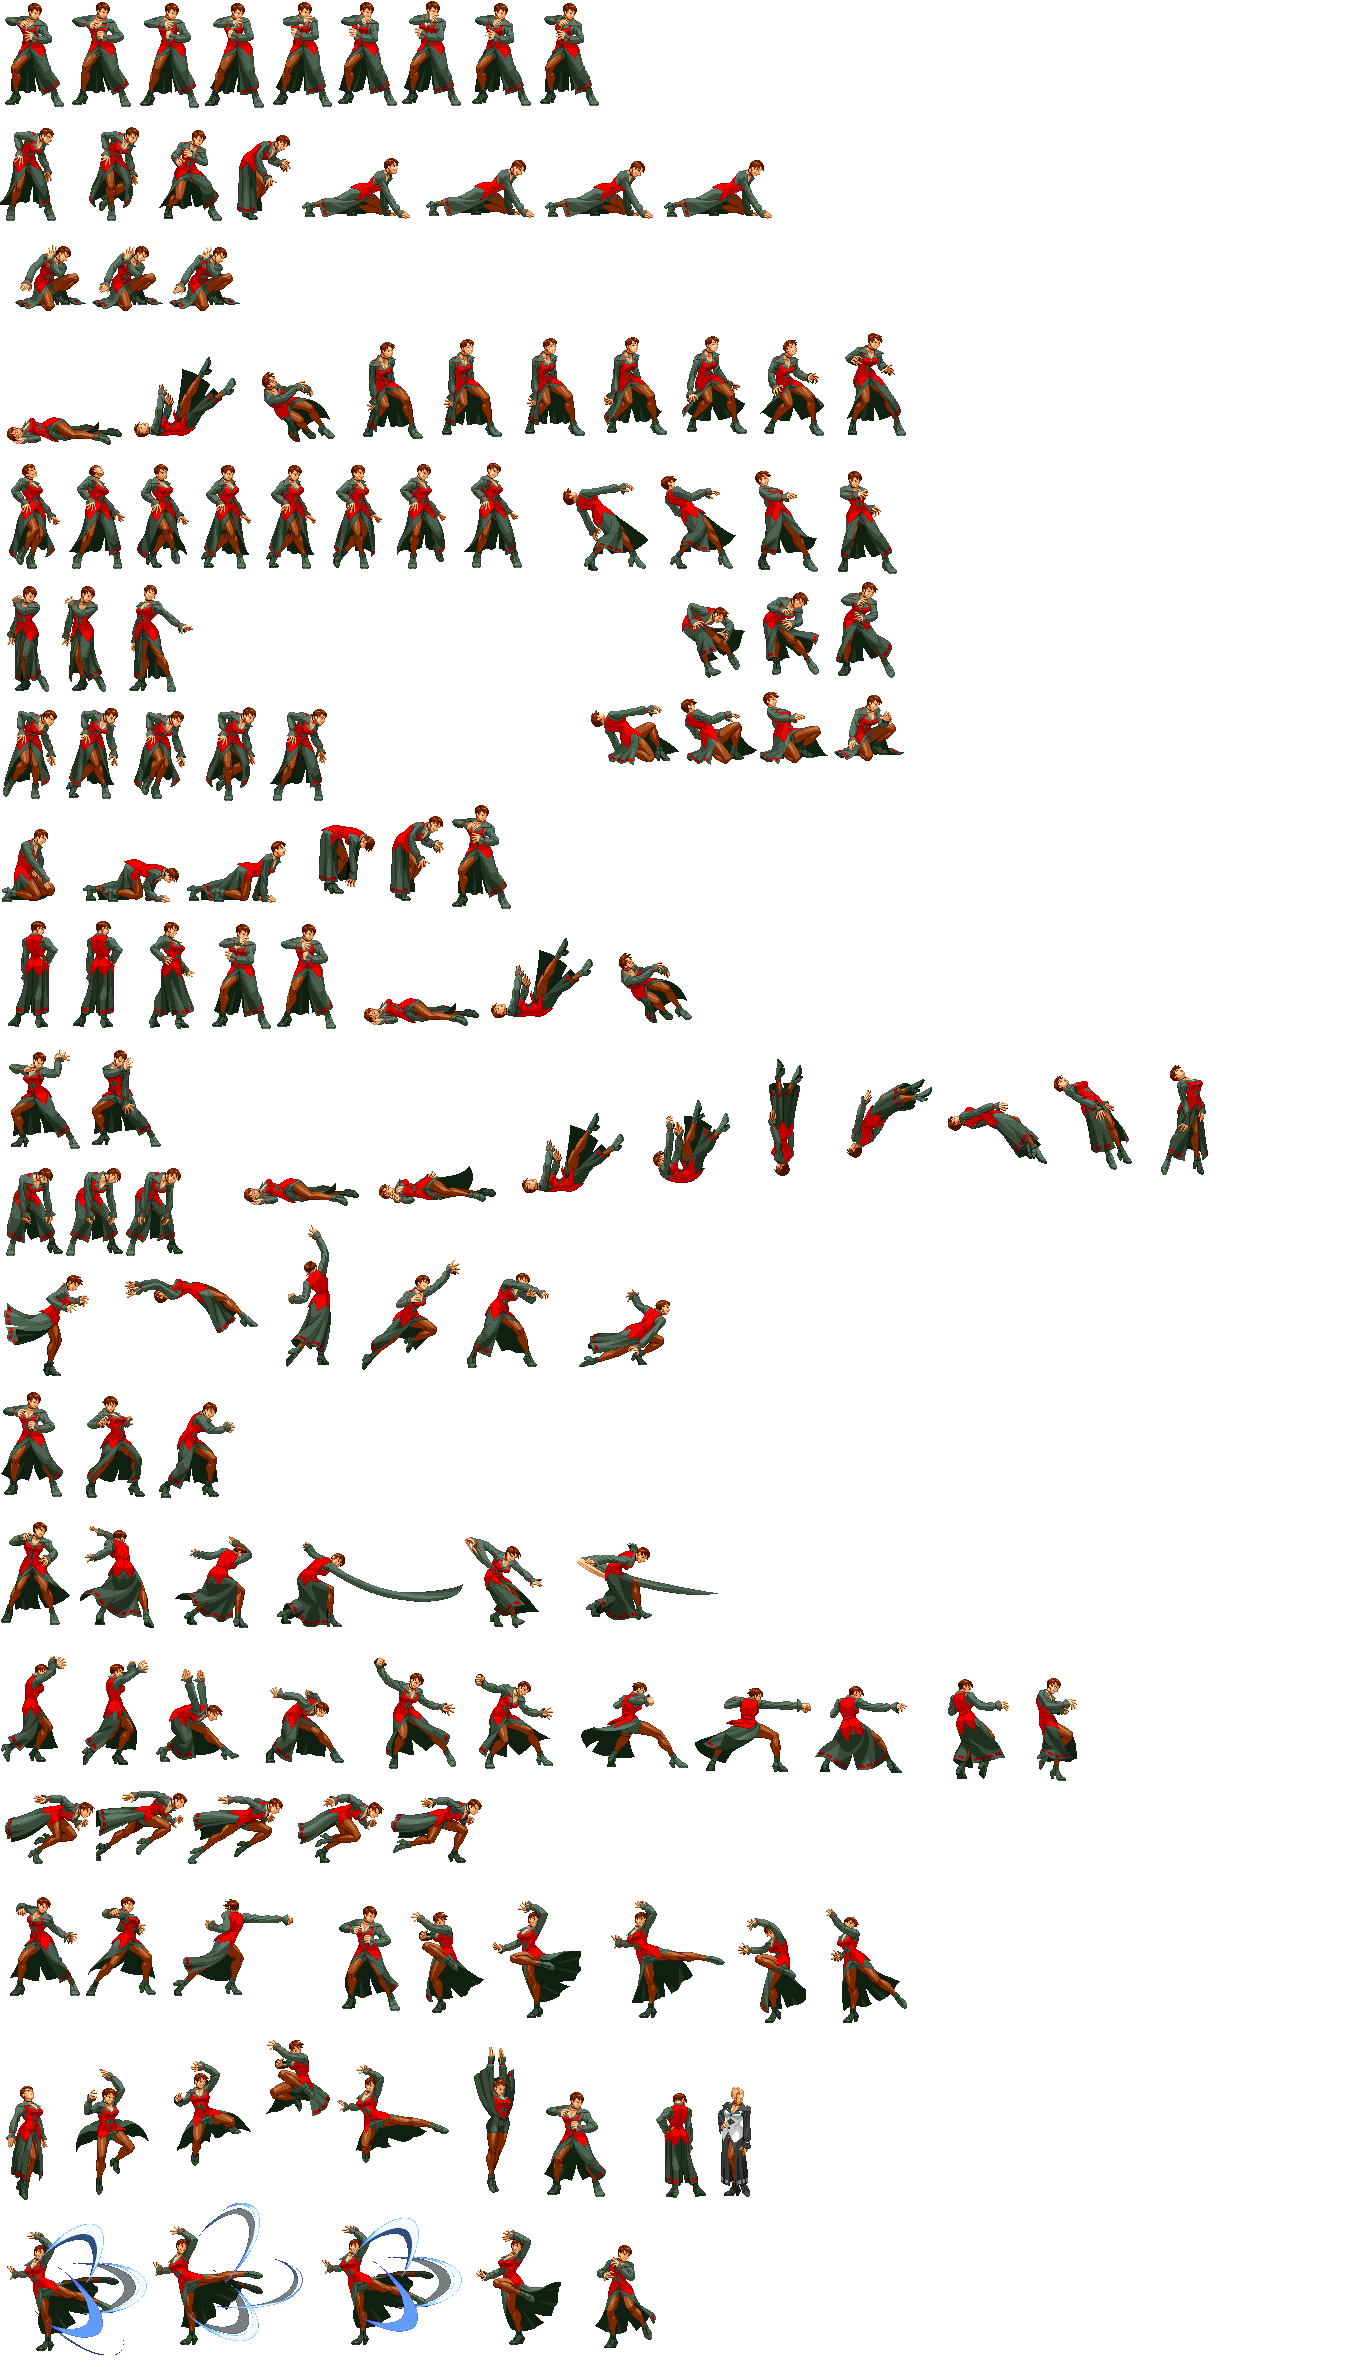 Image - Vice (Anime and Manga) Sprite Sheet.png | Www.dynapaul Wiki